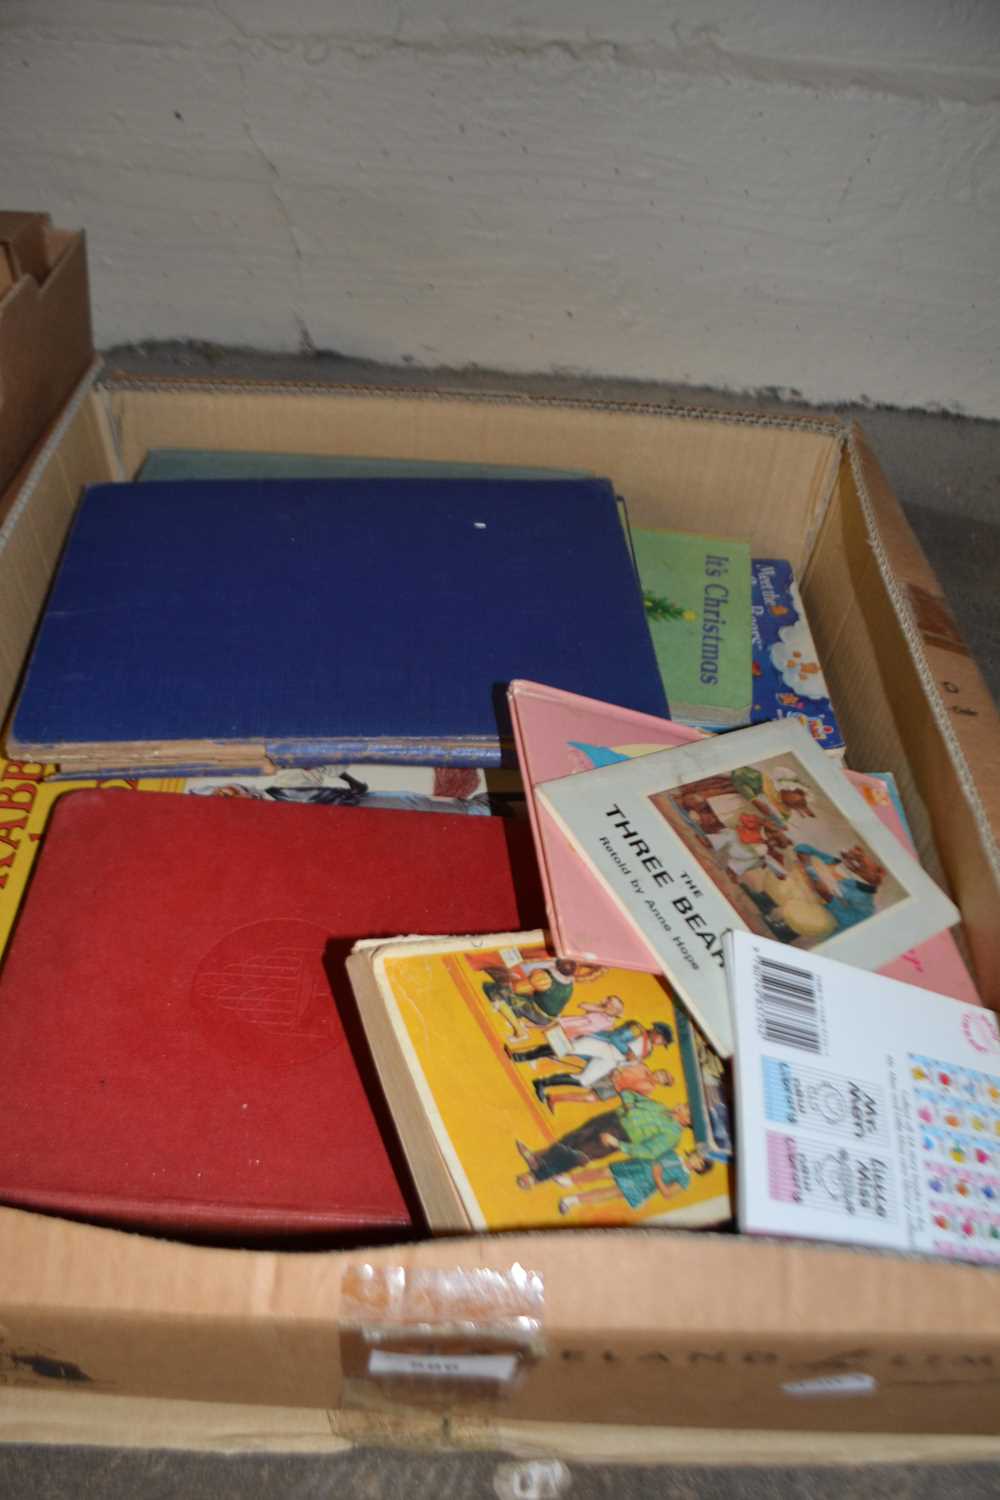 Books to include Enid Blyton, Big Book of Footbll Champions and other childrens books and annuals